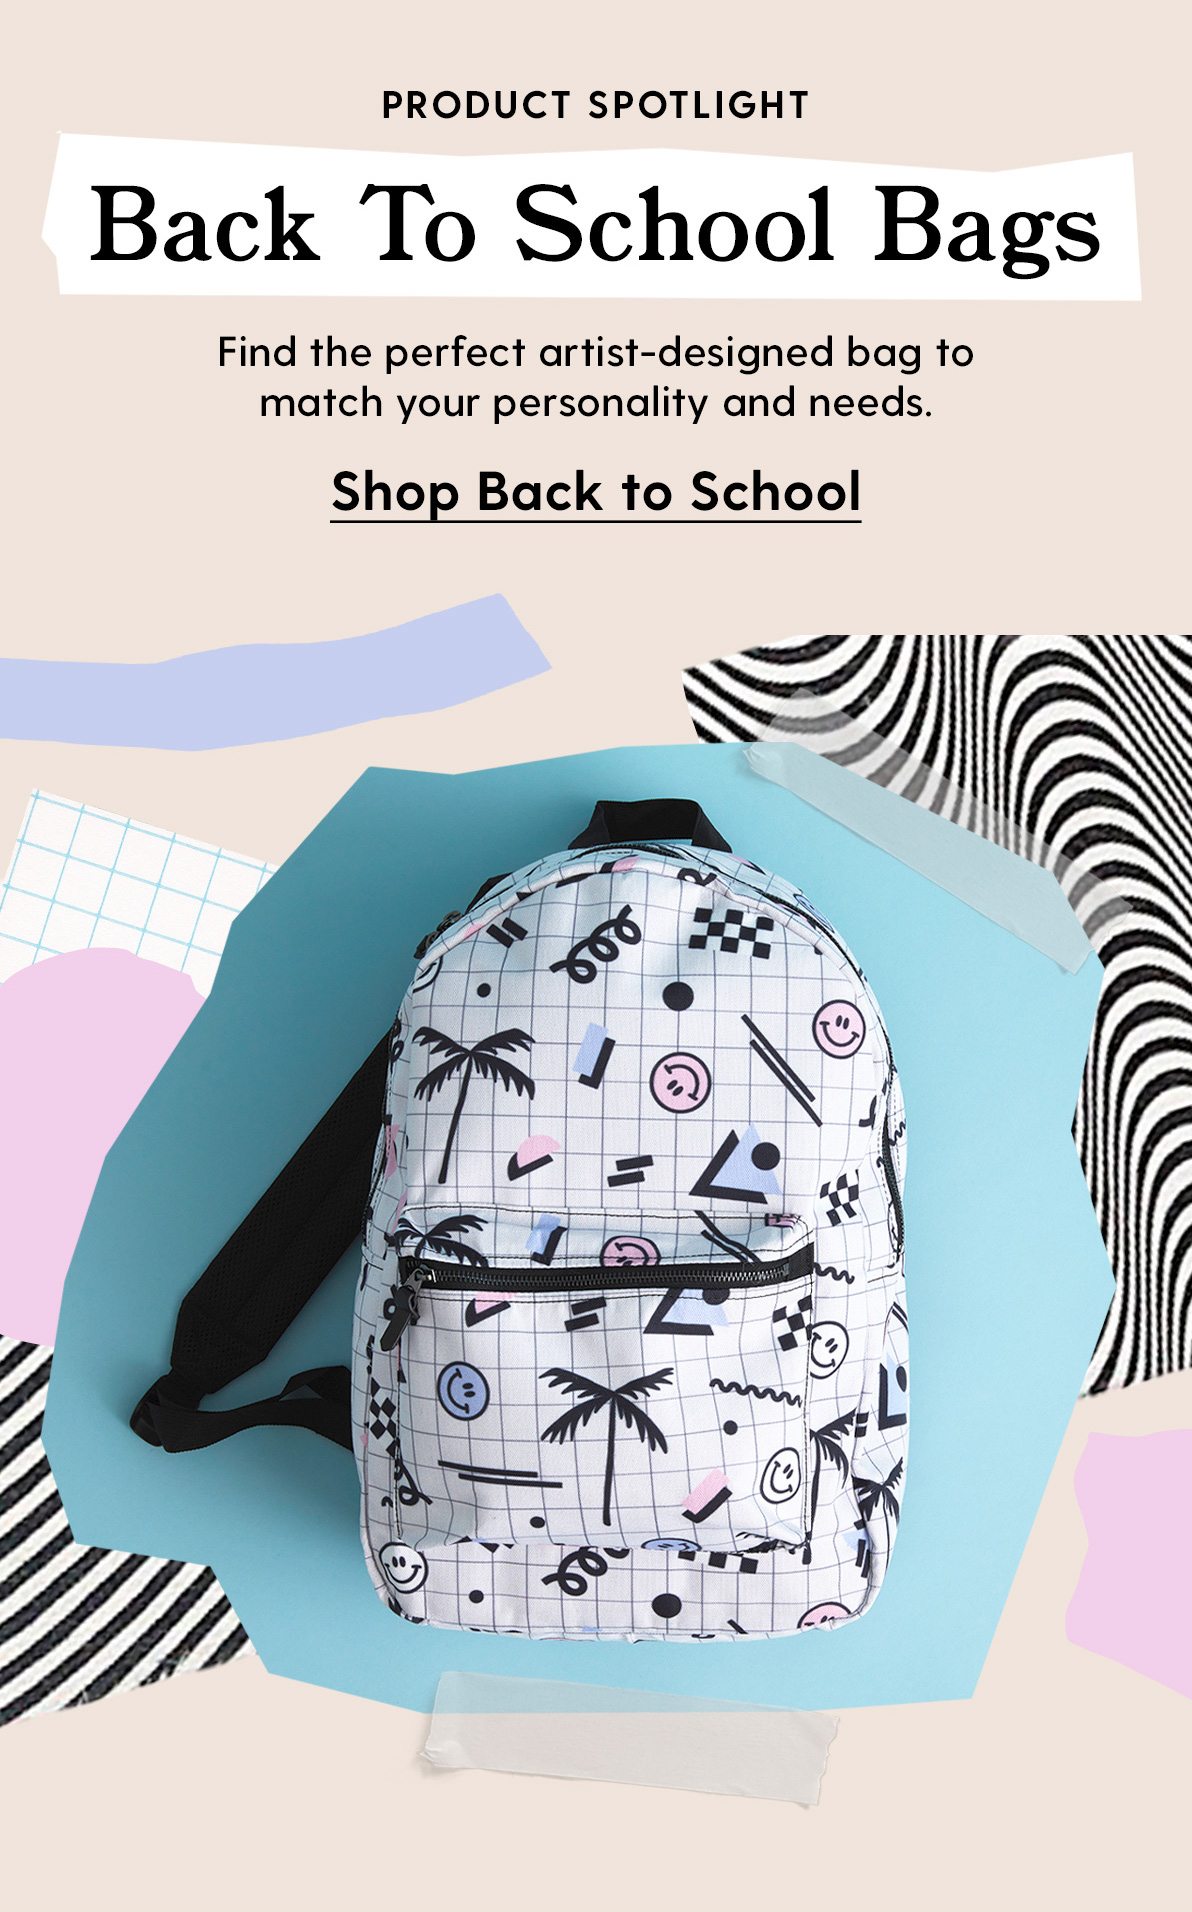 Product Spotlight Back To School Bags Find the perfect artist-designed bag to match your personality and needs. Shop Back To School